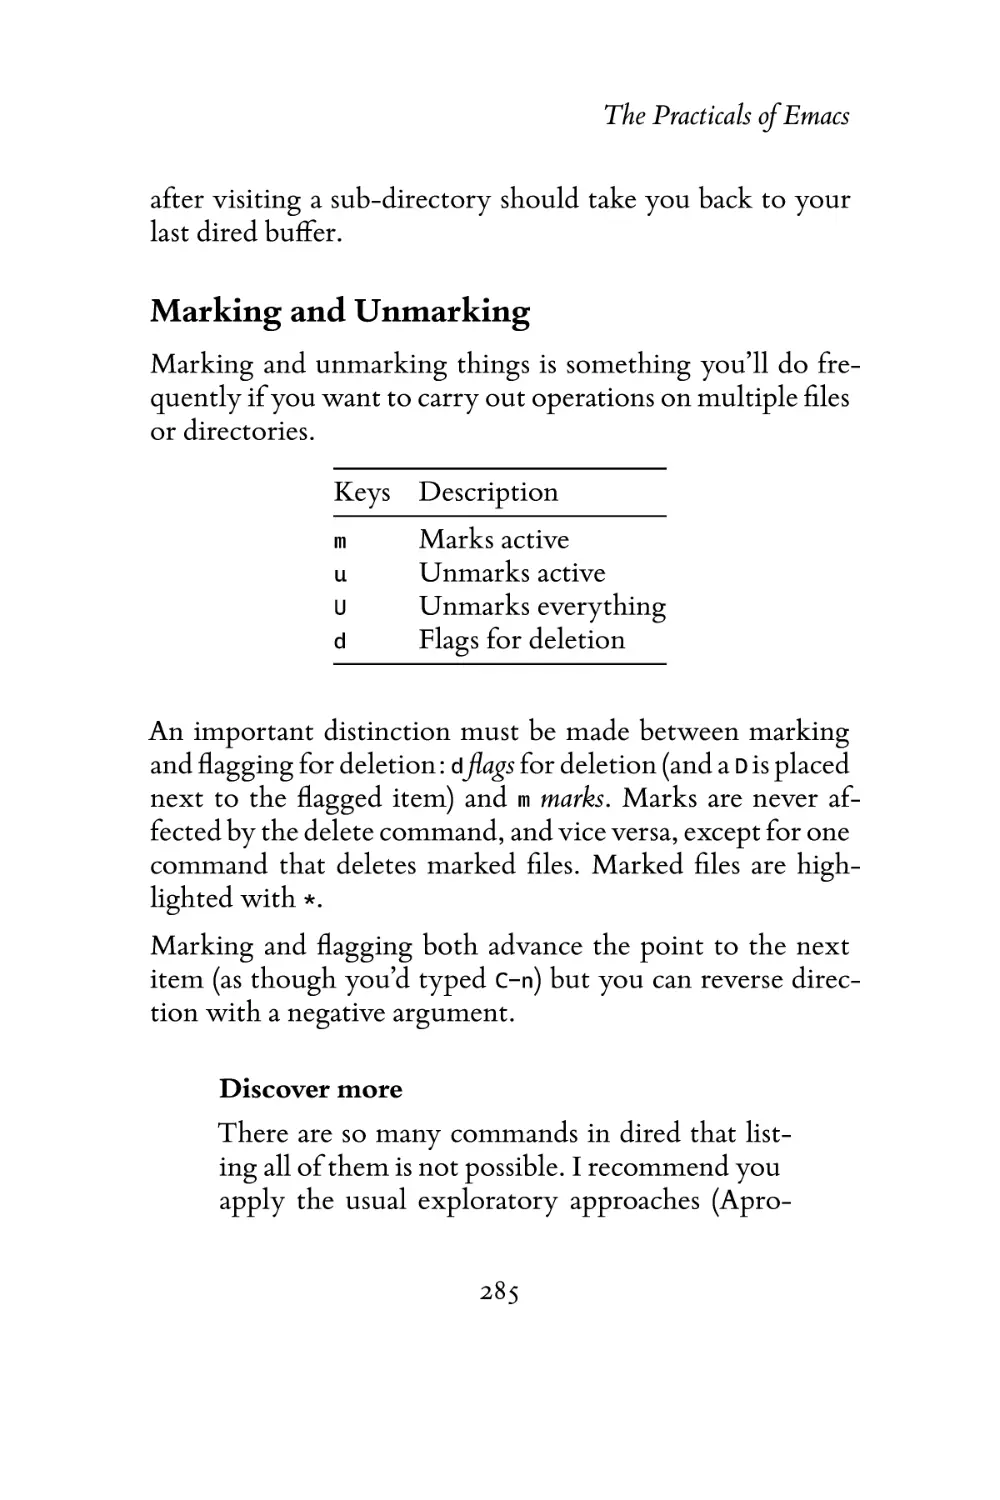 Marking and Unmarking